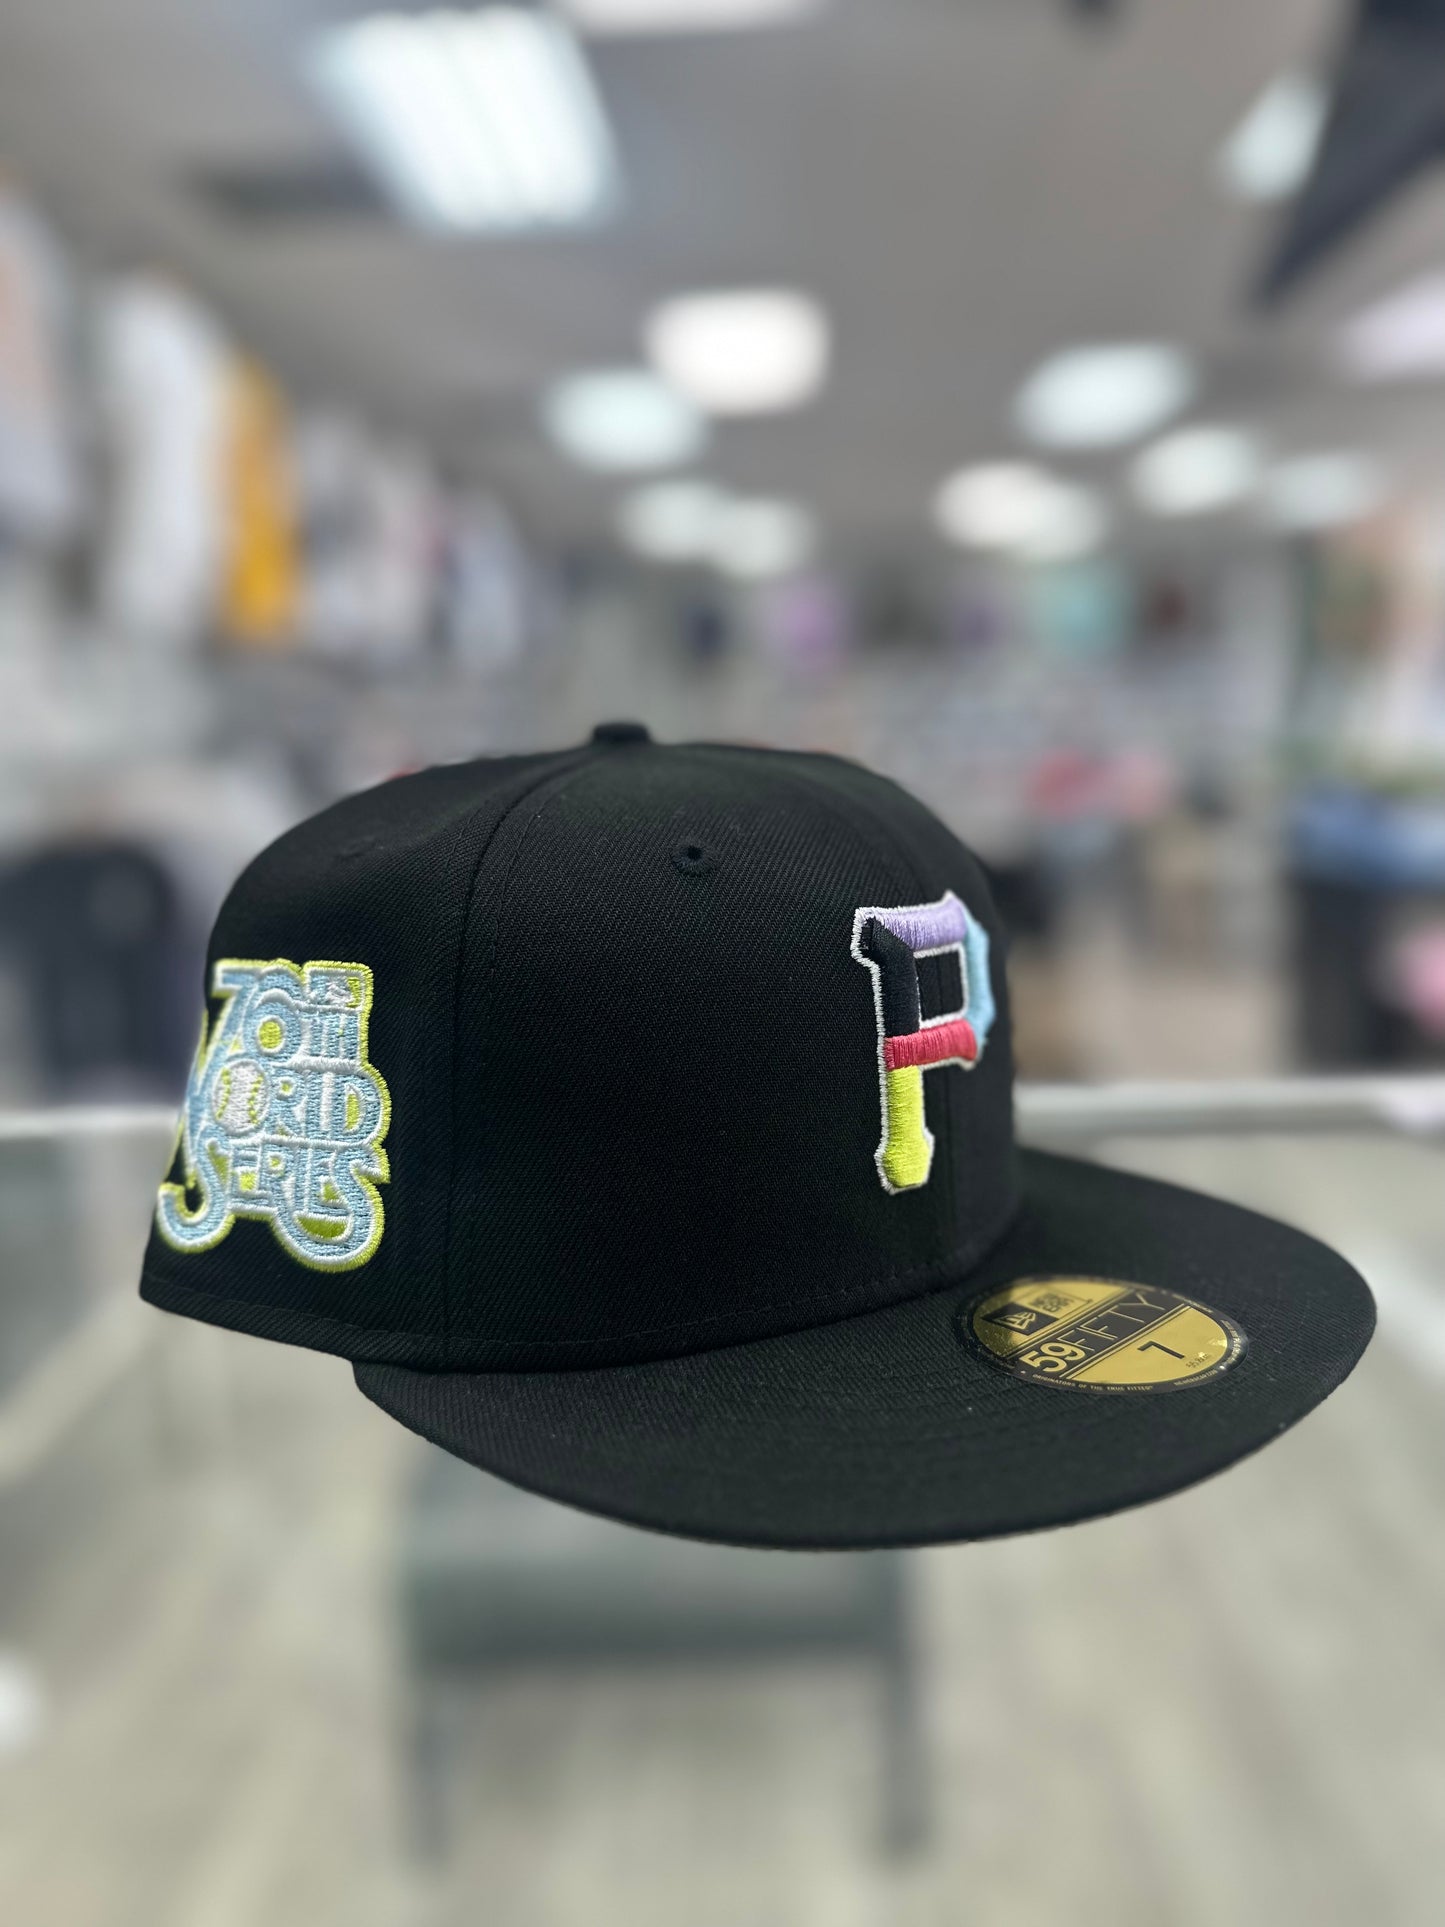 New Era Fitted "Pirates" Colorpack Black